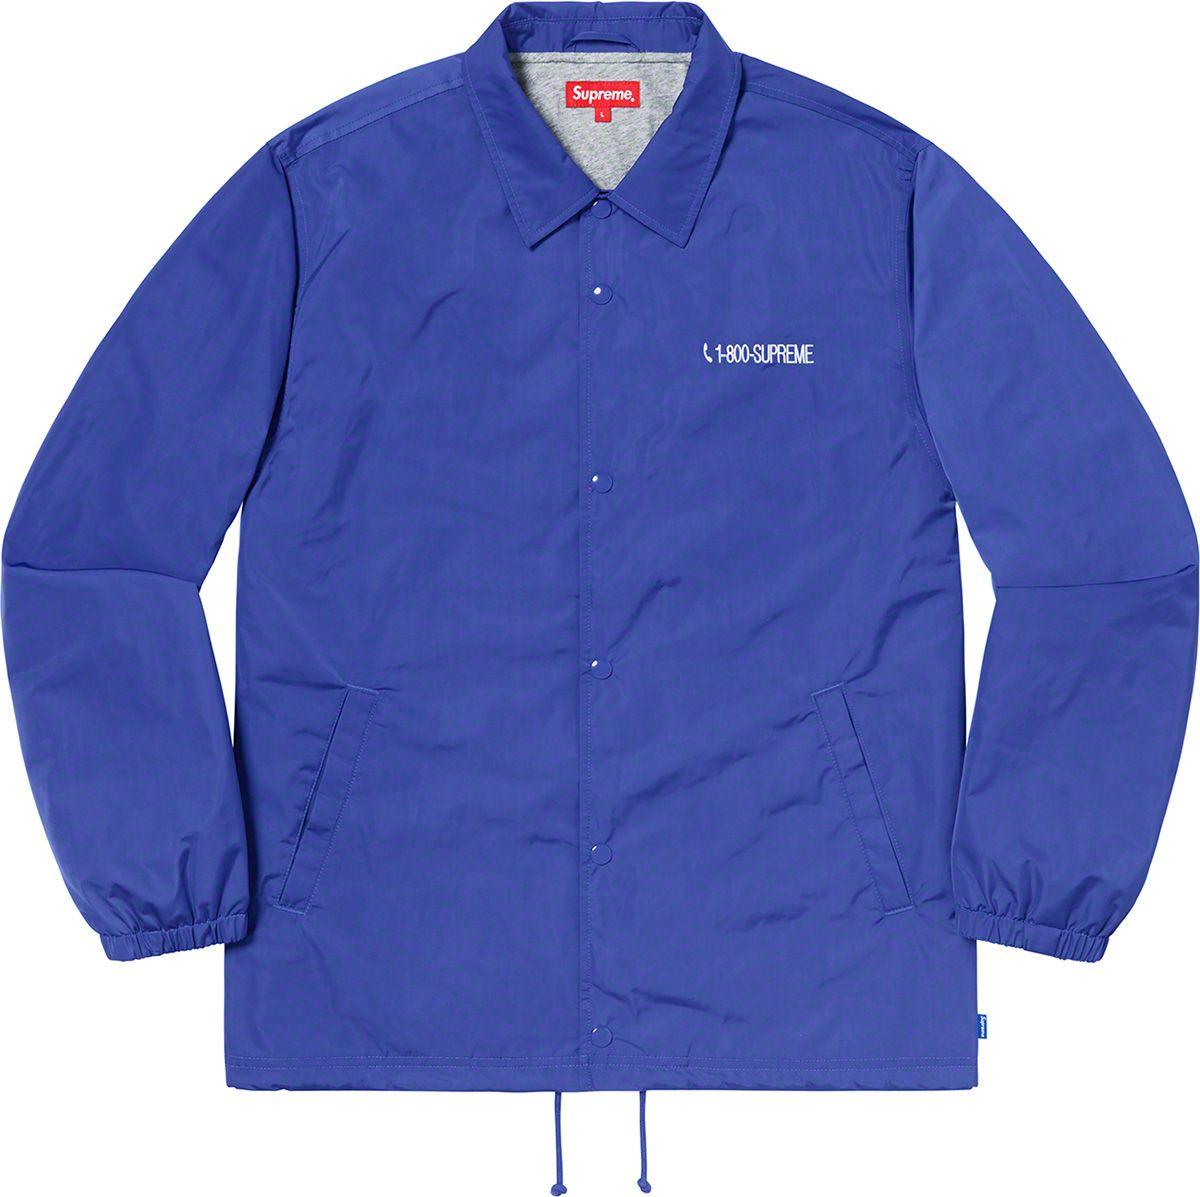 1-800 Coaches Jacket - Fall/Winter 2019 Preview – Supreme